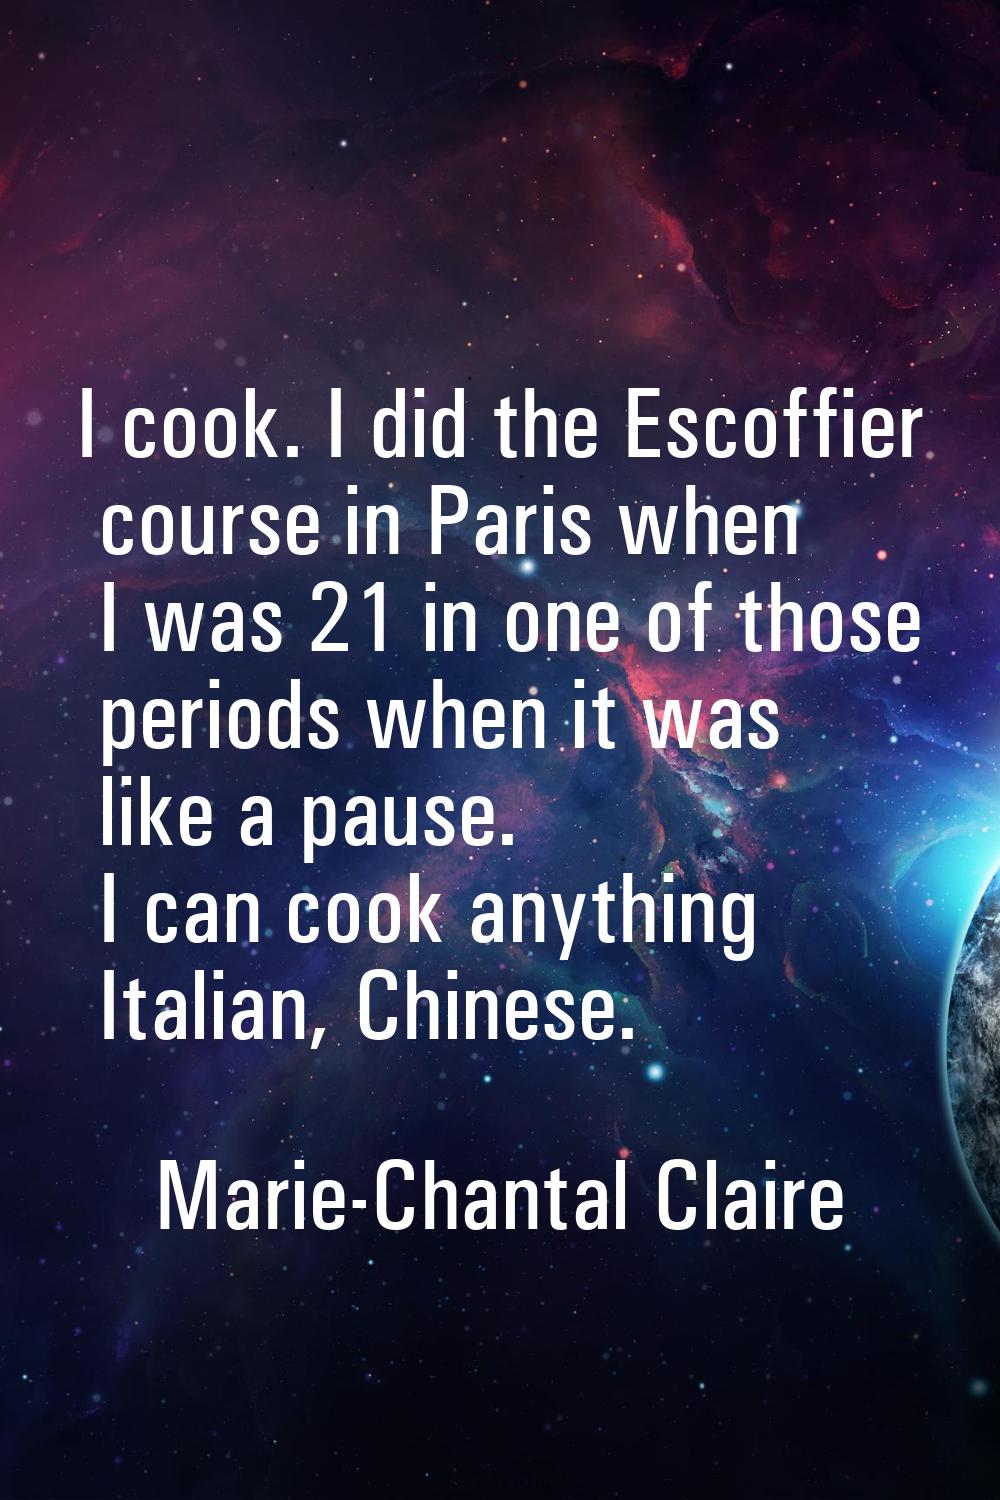 I cook. I did the Escoffier course in Paris when I was 21 in one of those periods when it was like 